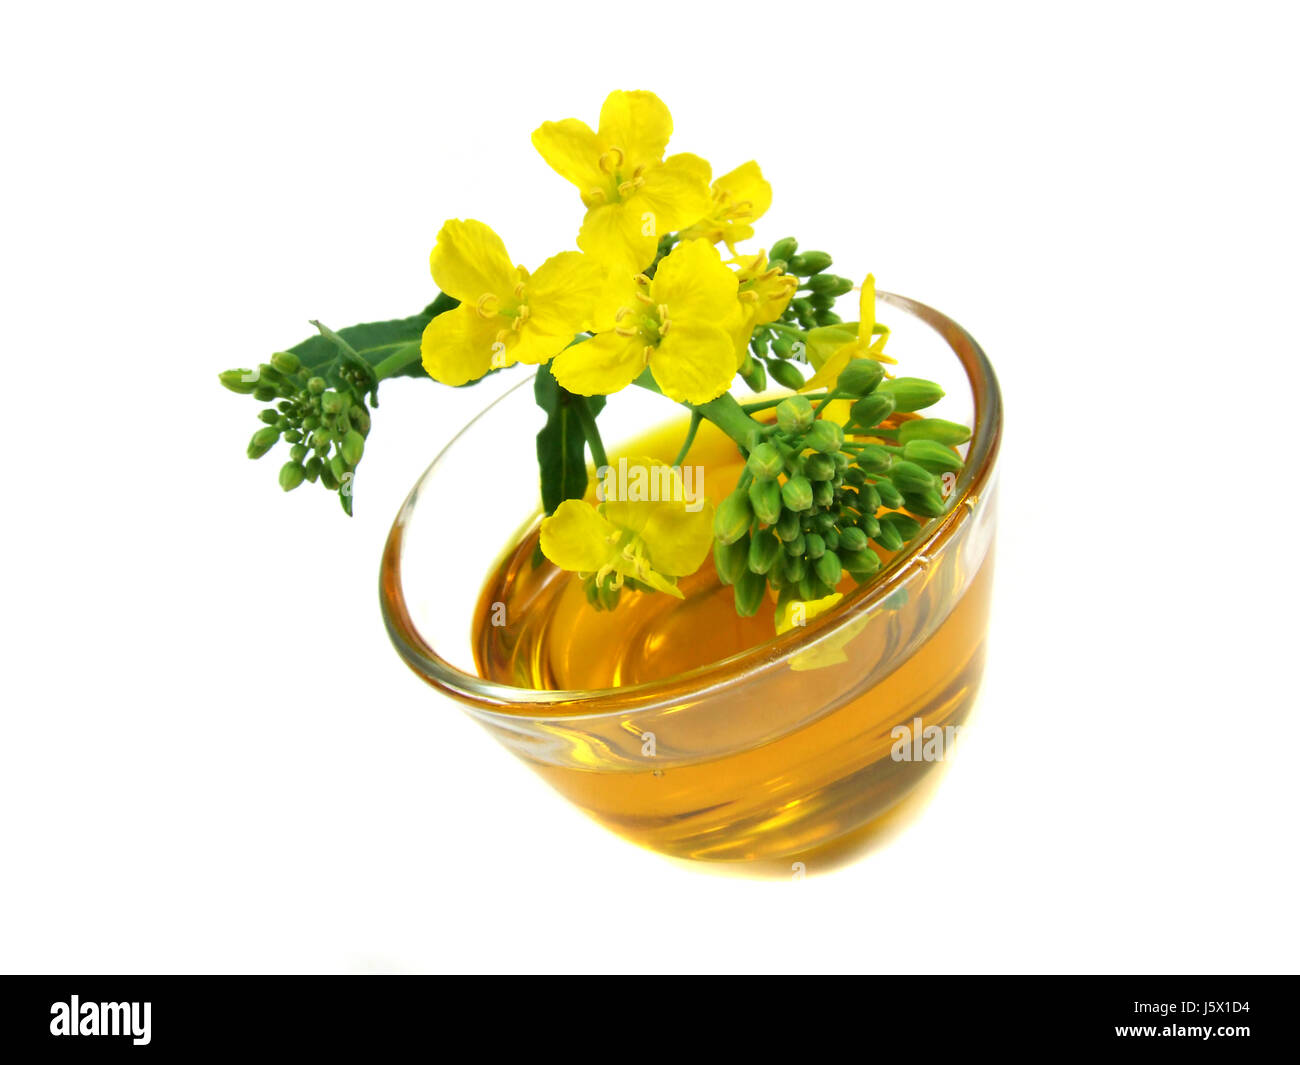 coleseed huddled coleseed boil cooks boiling cooking huddled yellow roast fry Stock Photo